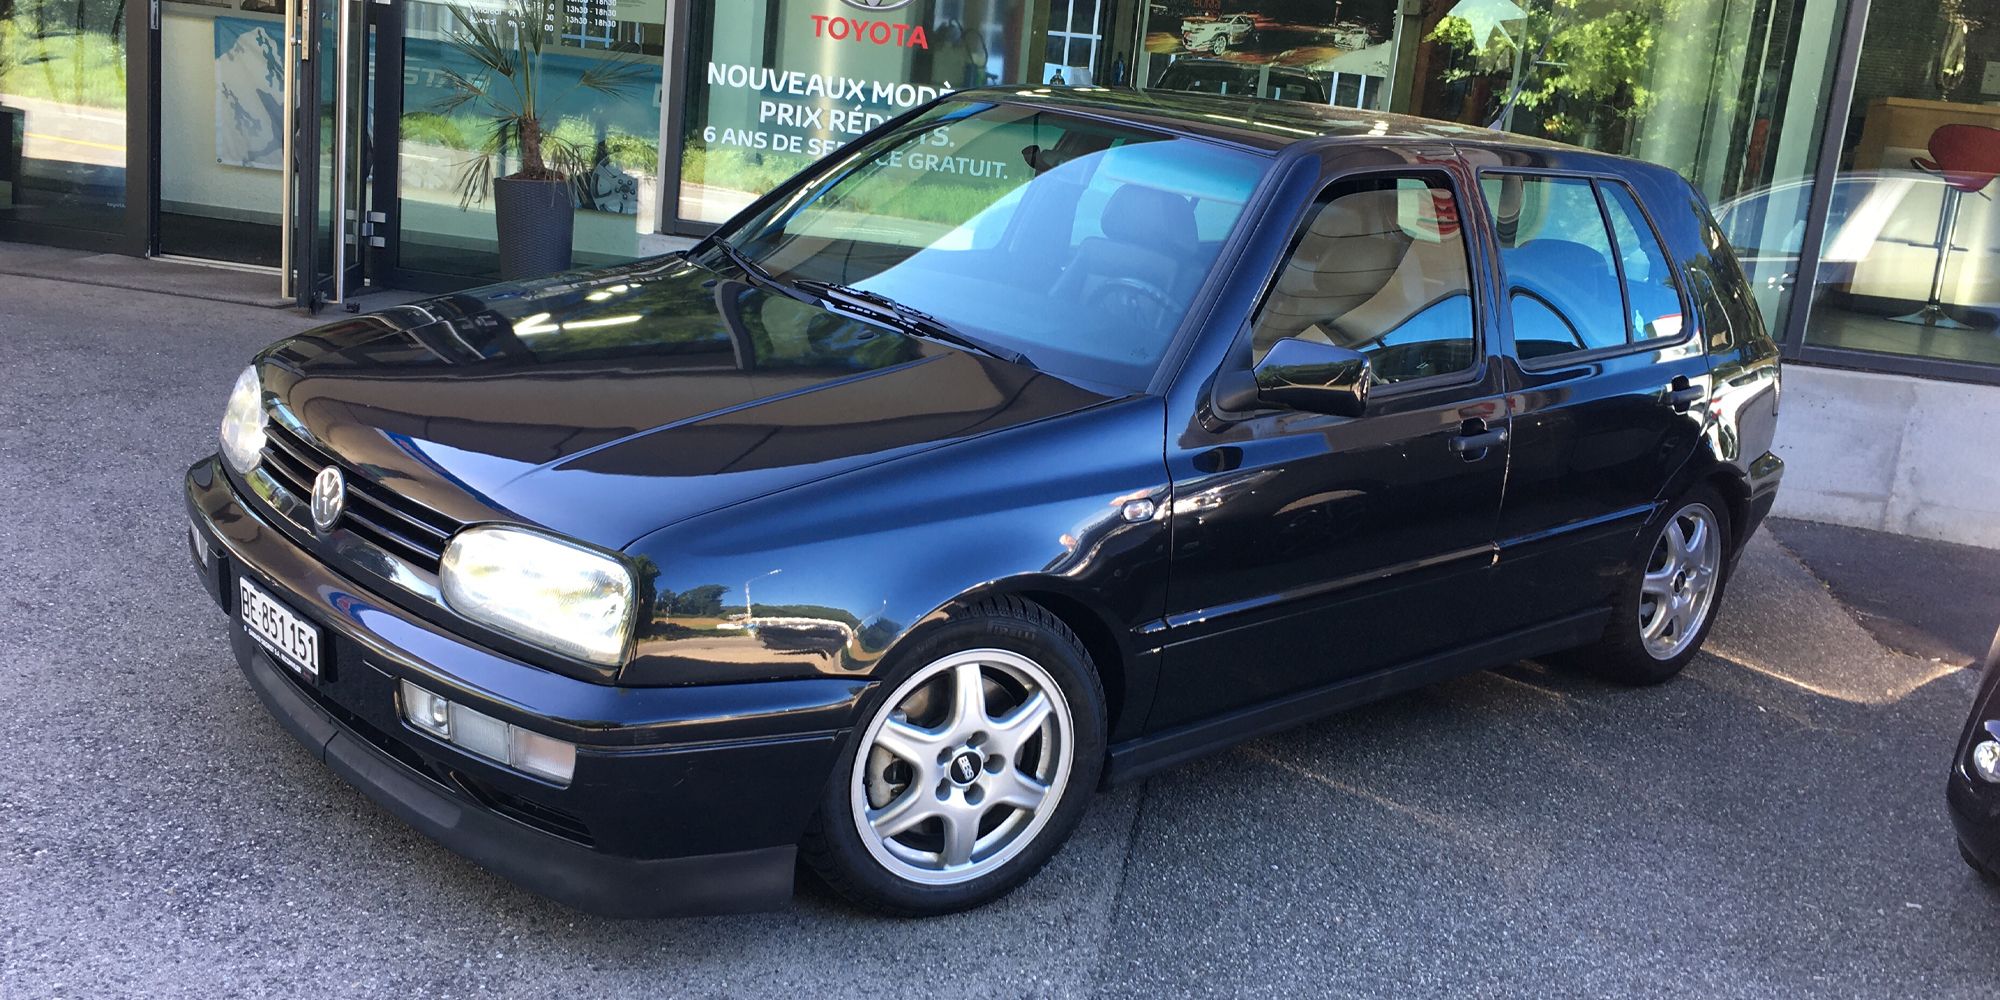 Front 3/4 view of the Golf VR6